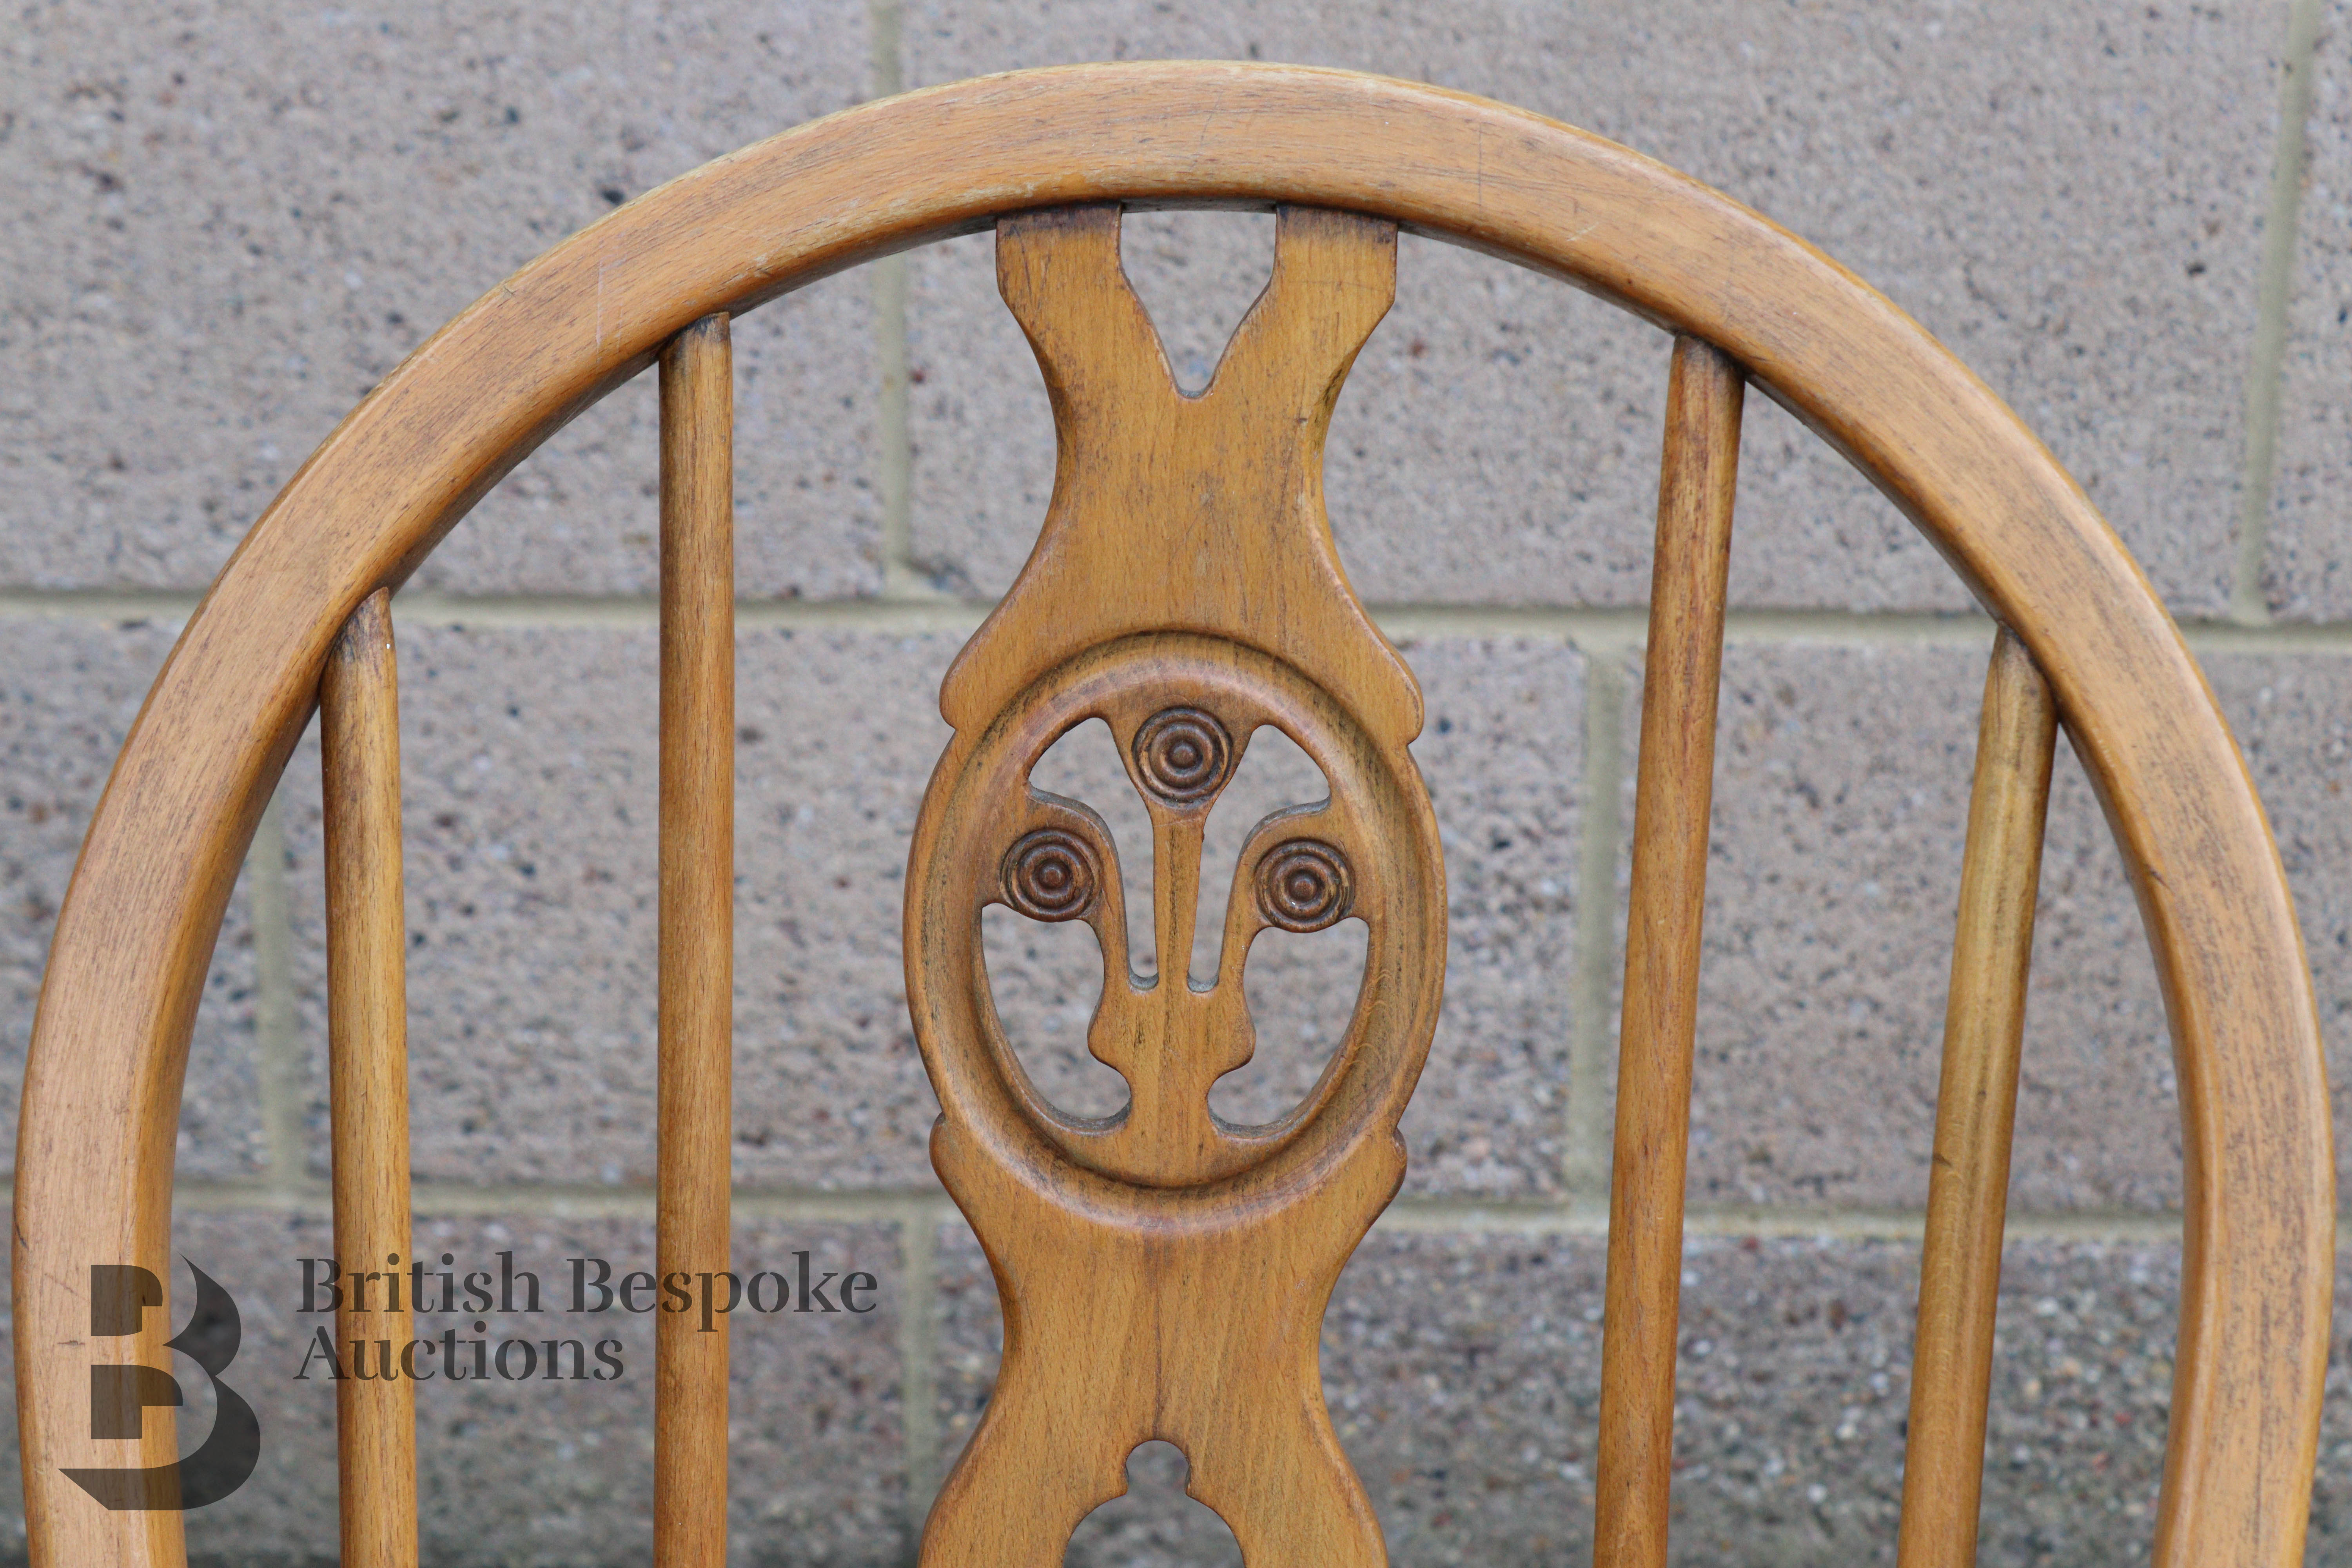 Ercol Spindle back Chairs - Image 5 of 6